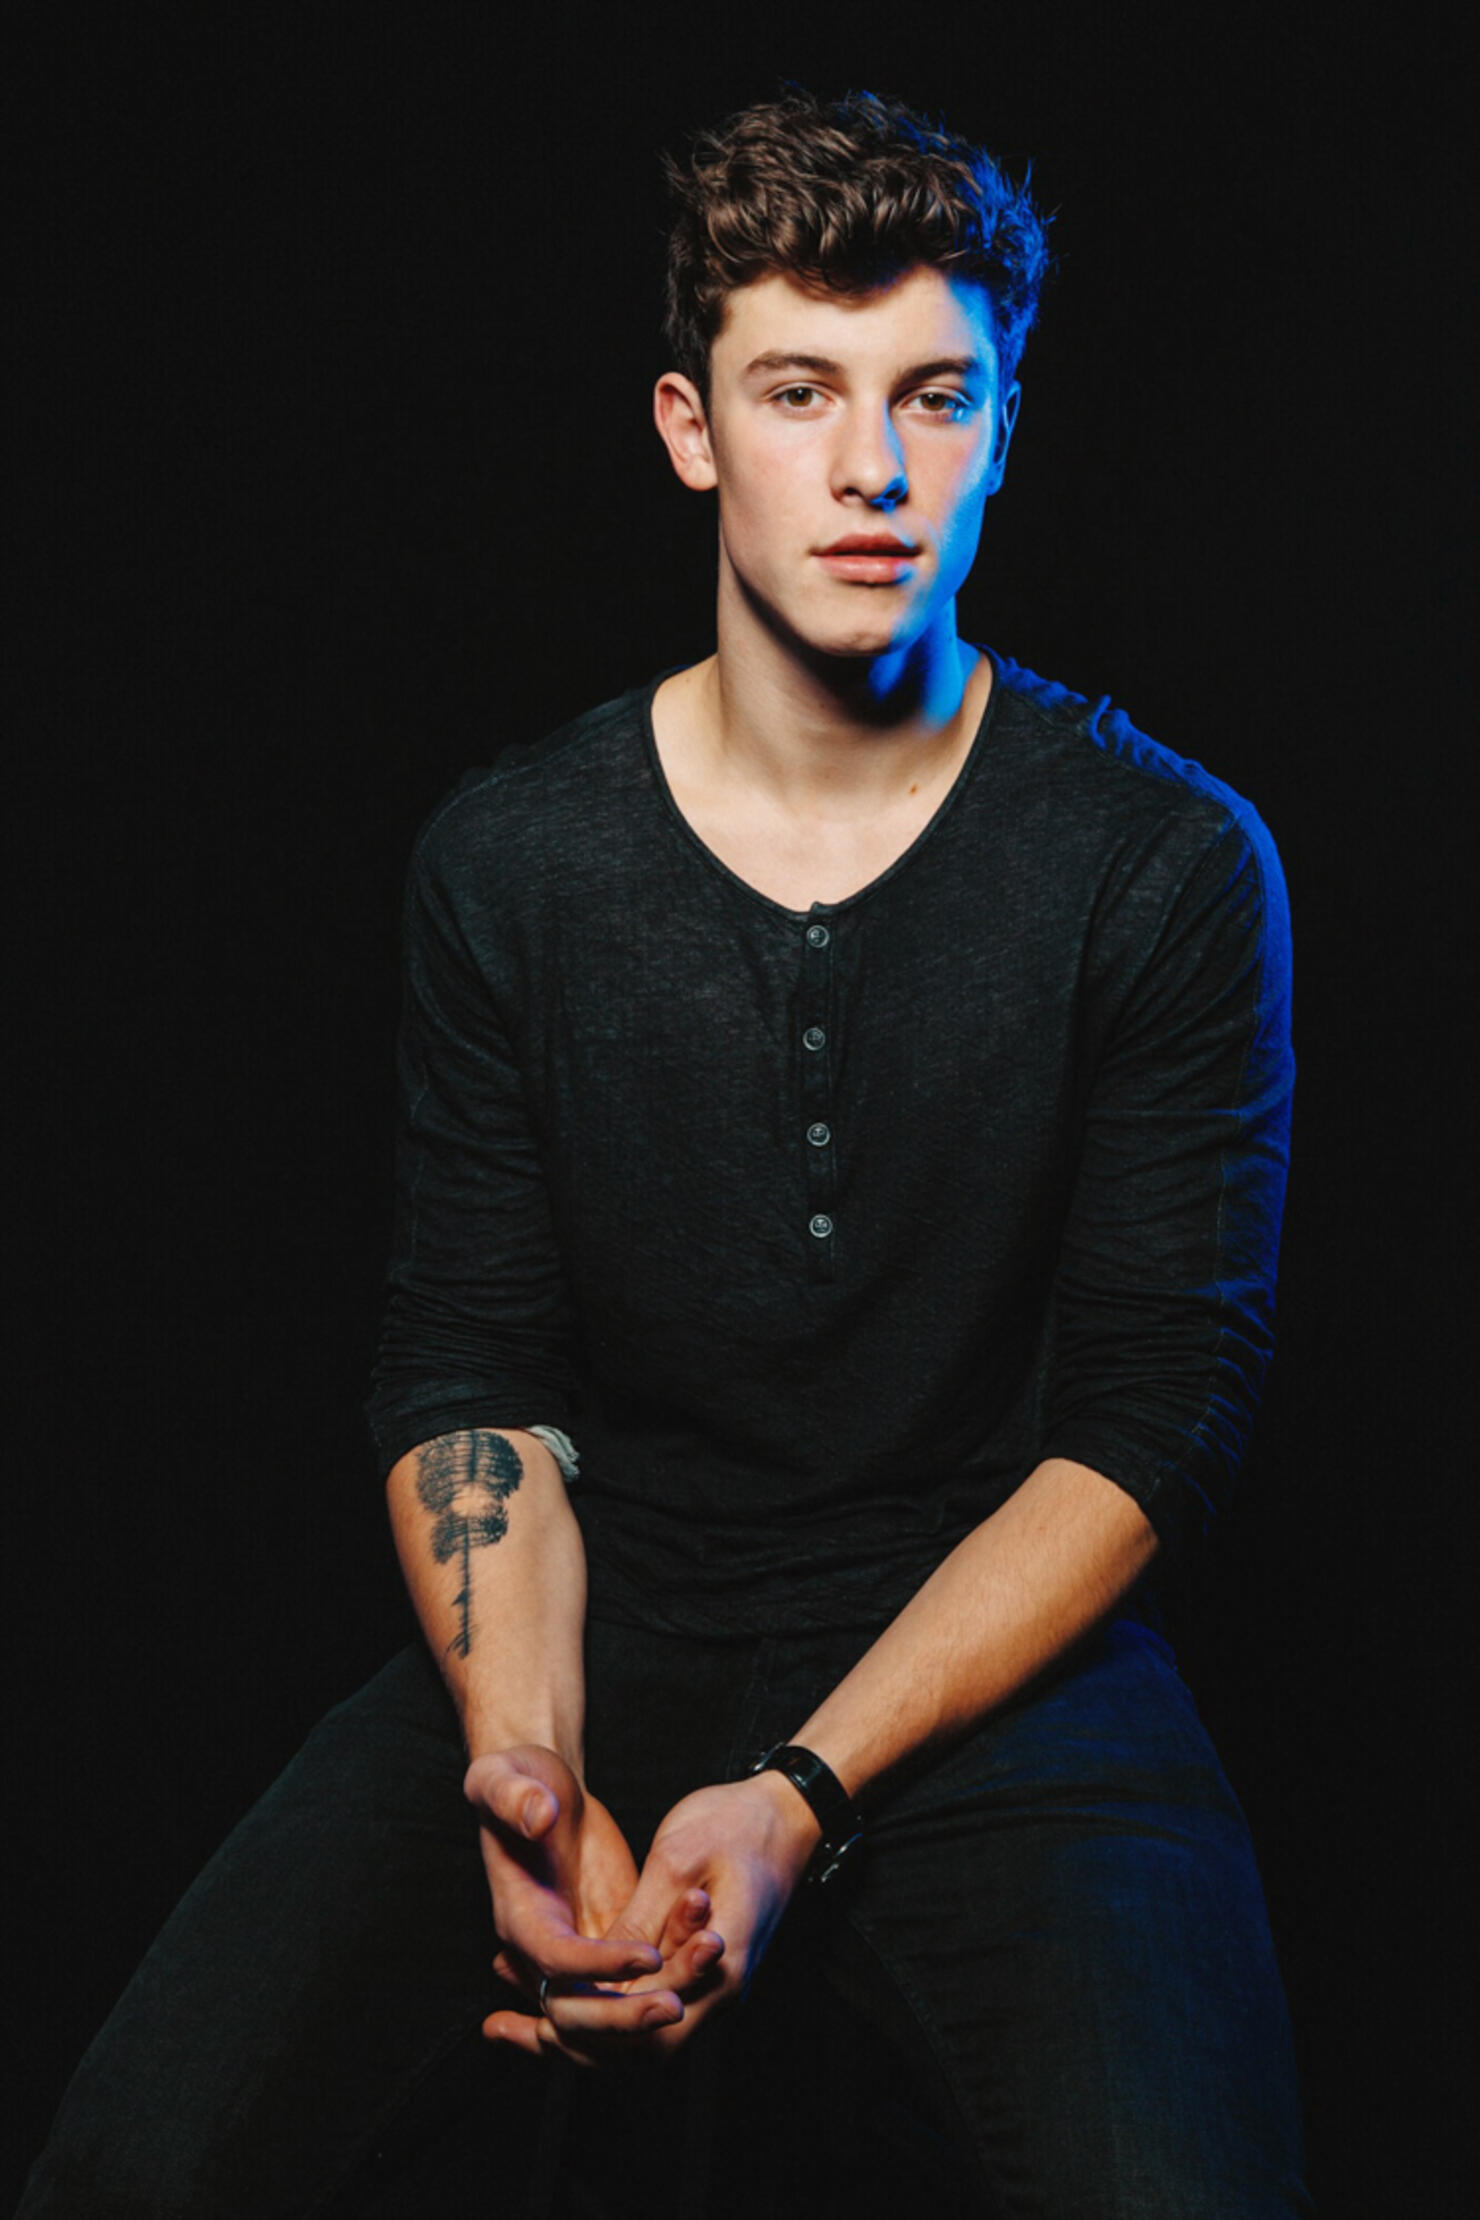 Shawn Mendes for iHeartRadio